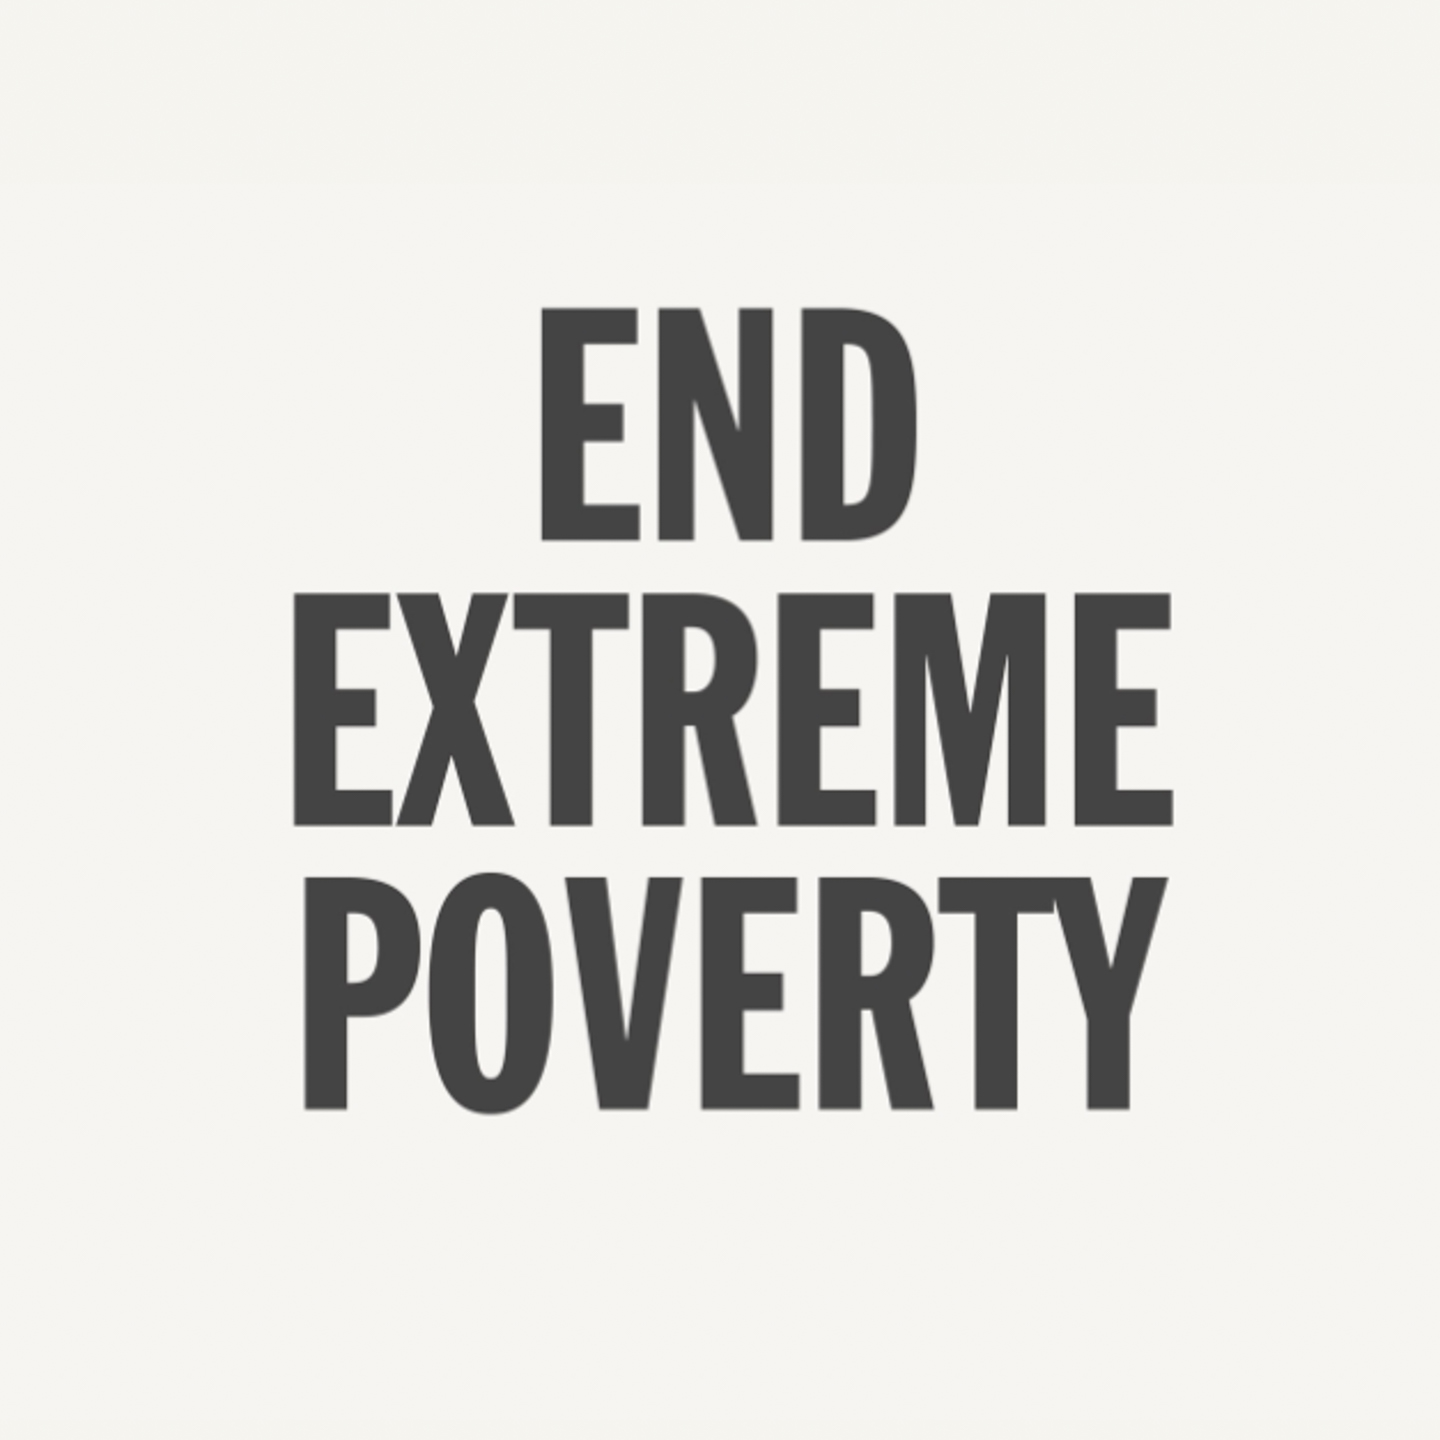 End extreme poverty